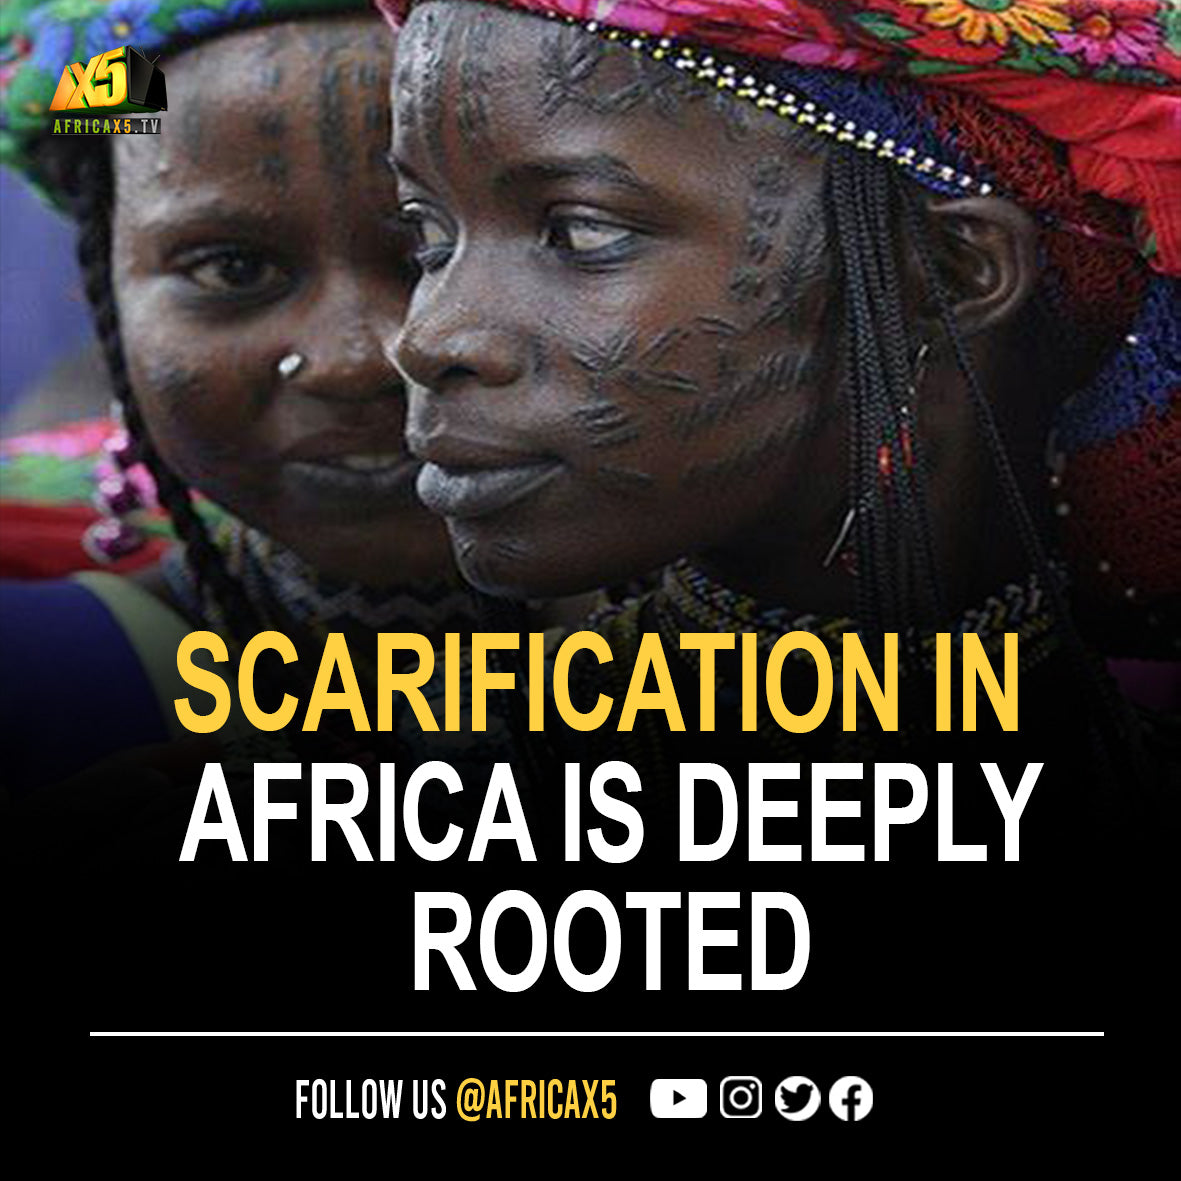 Scarification in Africa is a deeply rooted cultural practice that has been observed for millennia across various African tribes and regions.